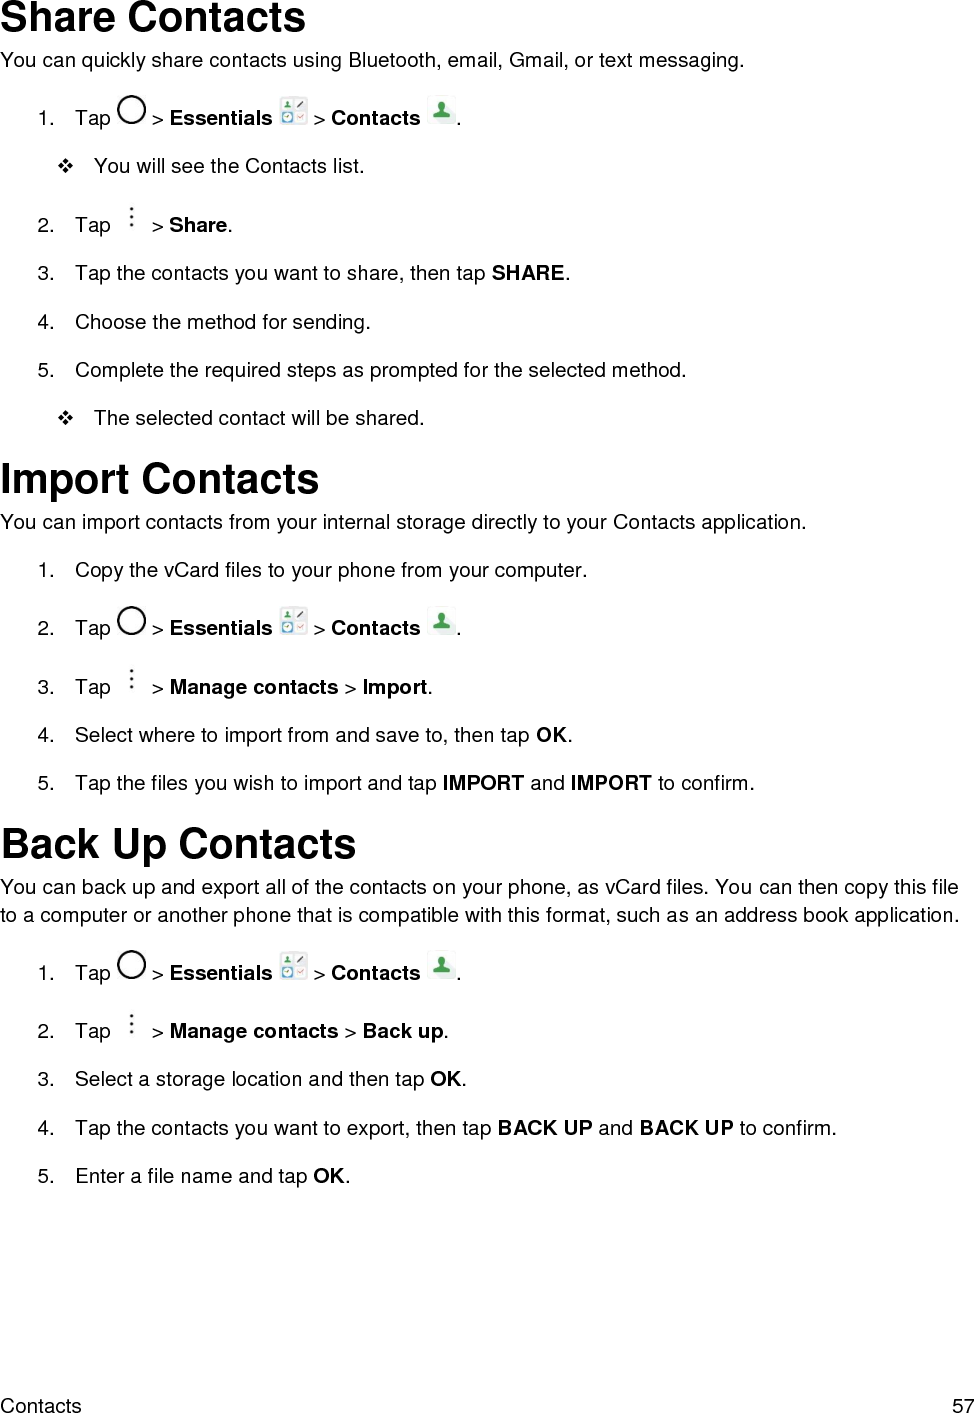  Contacts  57 Share Contacts You can quickly share contacts using Bluetooth, email, Gmail, or text messaging. 1.  Tap   &gt; Essentials   &gt; Contacts  .   You will see the Contacts list. 2.  Tap   &gt; Share. 3.  Tap the contacts you want to share, then tap SHARE.  4.  Choose the method for sending. 5.  Complete the required steps as prompted for the selected method.    The selected contact will be shared. Import Contacts You can import contacts from your internal storage directly to your Contacts application. 1.  Copy the vCard files to your phone from your computer. 2.  Tap   &gt; Essentials   &gt; Contacts  . 3.  Tap   &gt; Manage contacts &gt; Import. 4.  Select where to import from and save to, then tap OK. 5.  Tap the files you wish to import and tap IMPORT and IMPORT to confirm. Back Up Contacts You can back up and export all of the contacts on your phone, as vCard files. You can then copy this file to a computer or another phone that is compatible with this format, such as an address book application.  1.  Tap   &gt; Essentials   &gt; Contacts  . 2.  Tap   &gt; Manage contacts &gt; Back up. 3.  Select a storage location and then tap OK. 4.  Tap the contacts you want to export, then tap BACK UP and BACK UP to confirm. 5.  Enter a file name and tap OK. 